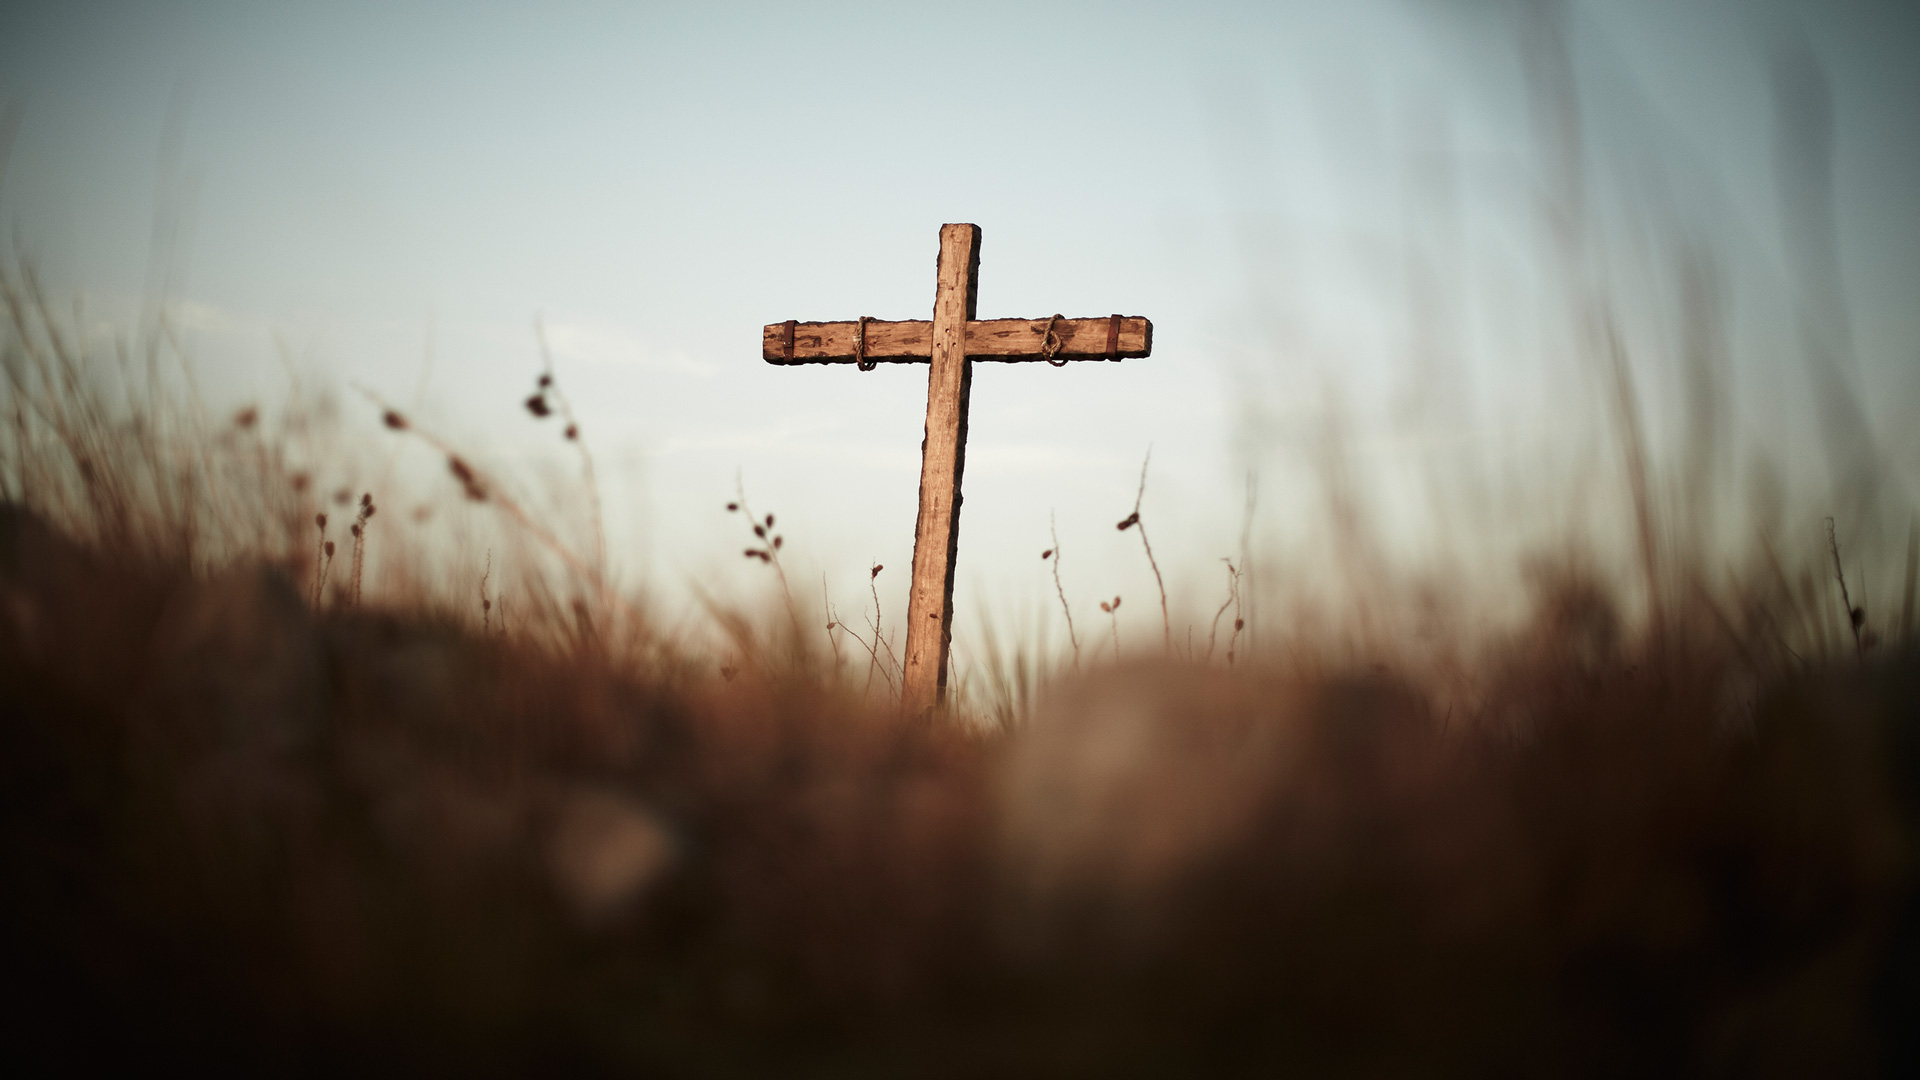 Wednesday Wallpaper: Take Me to the Cross and Leave Me There - Jacob Abshire